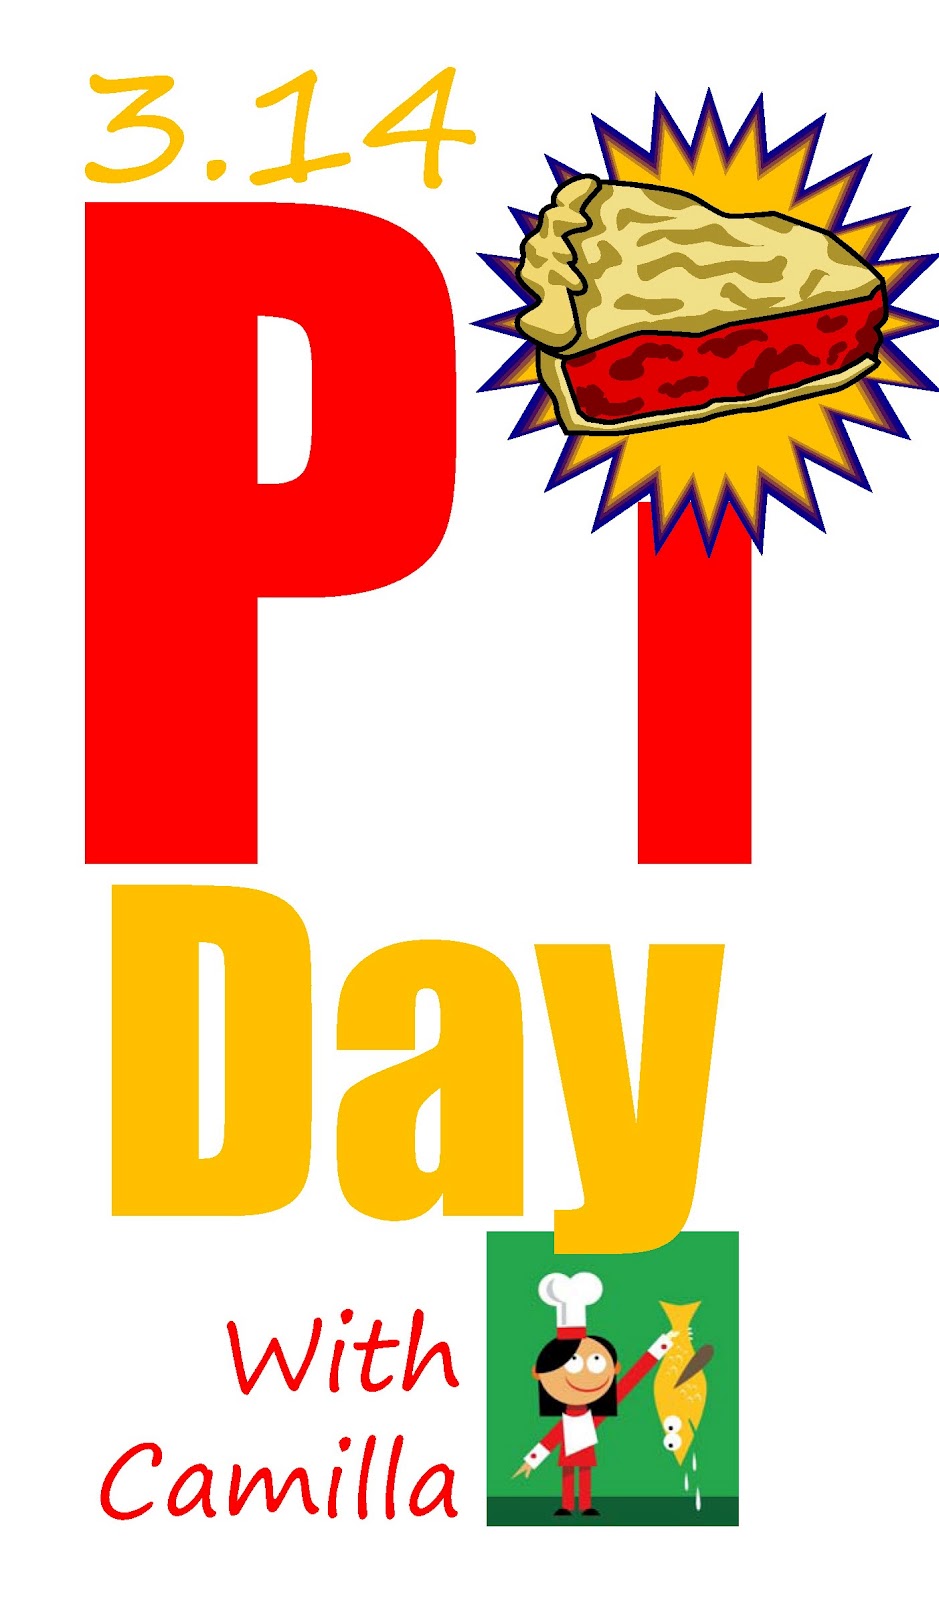 Join a Pie Potluck...for Pi Day {Call for Recipes}